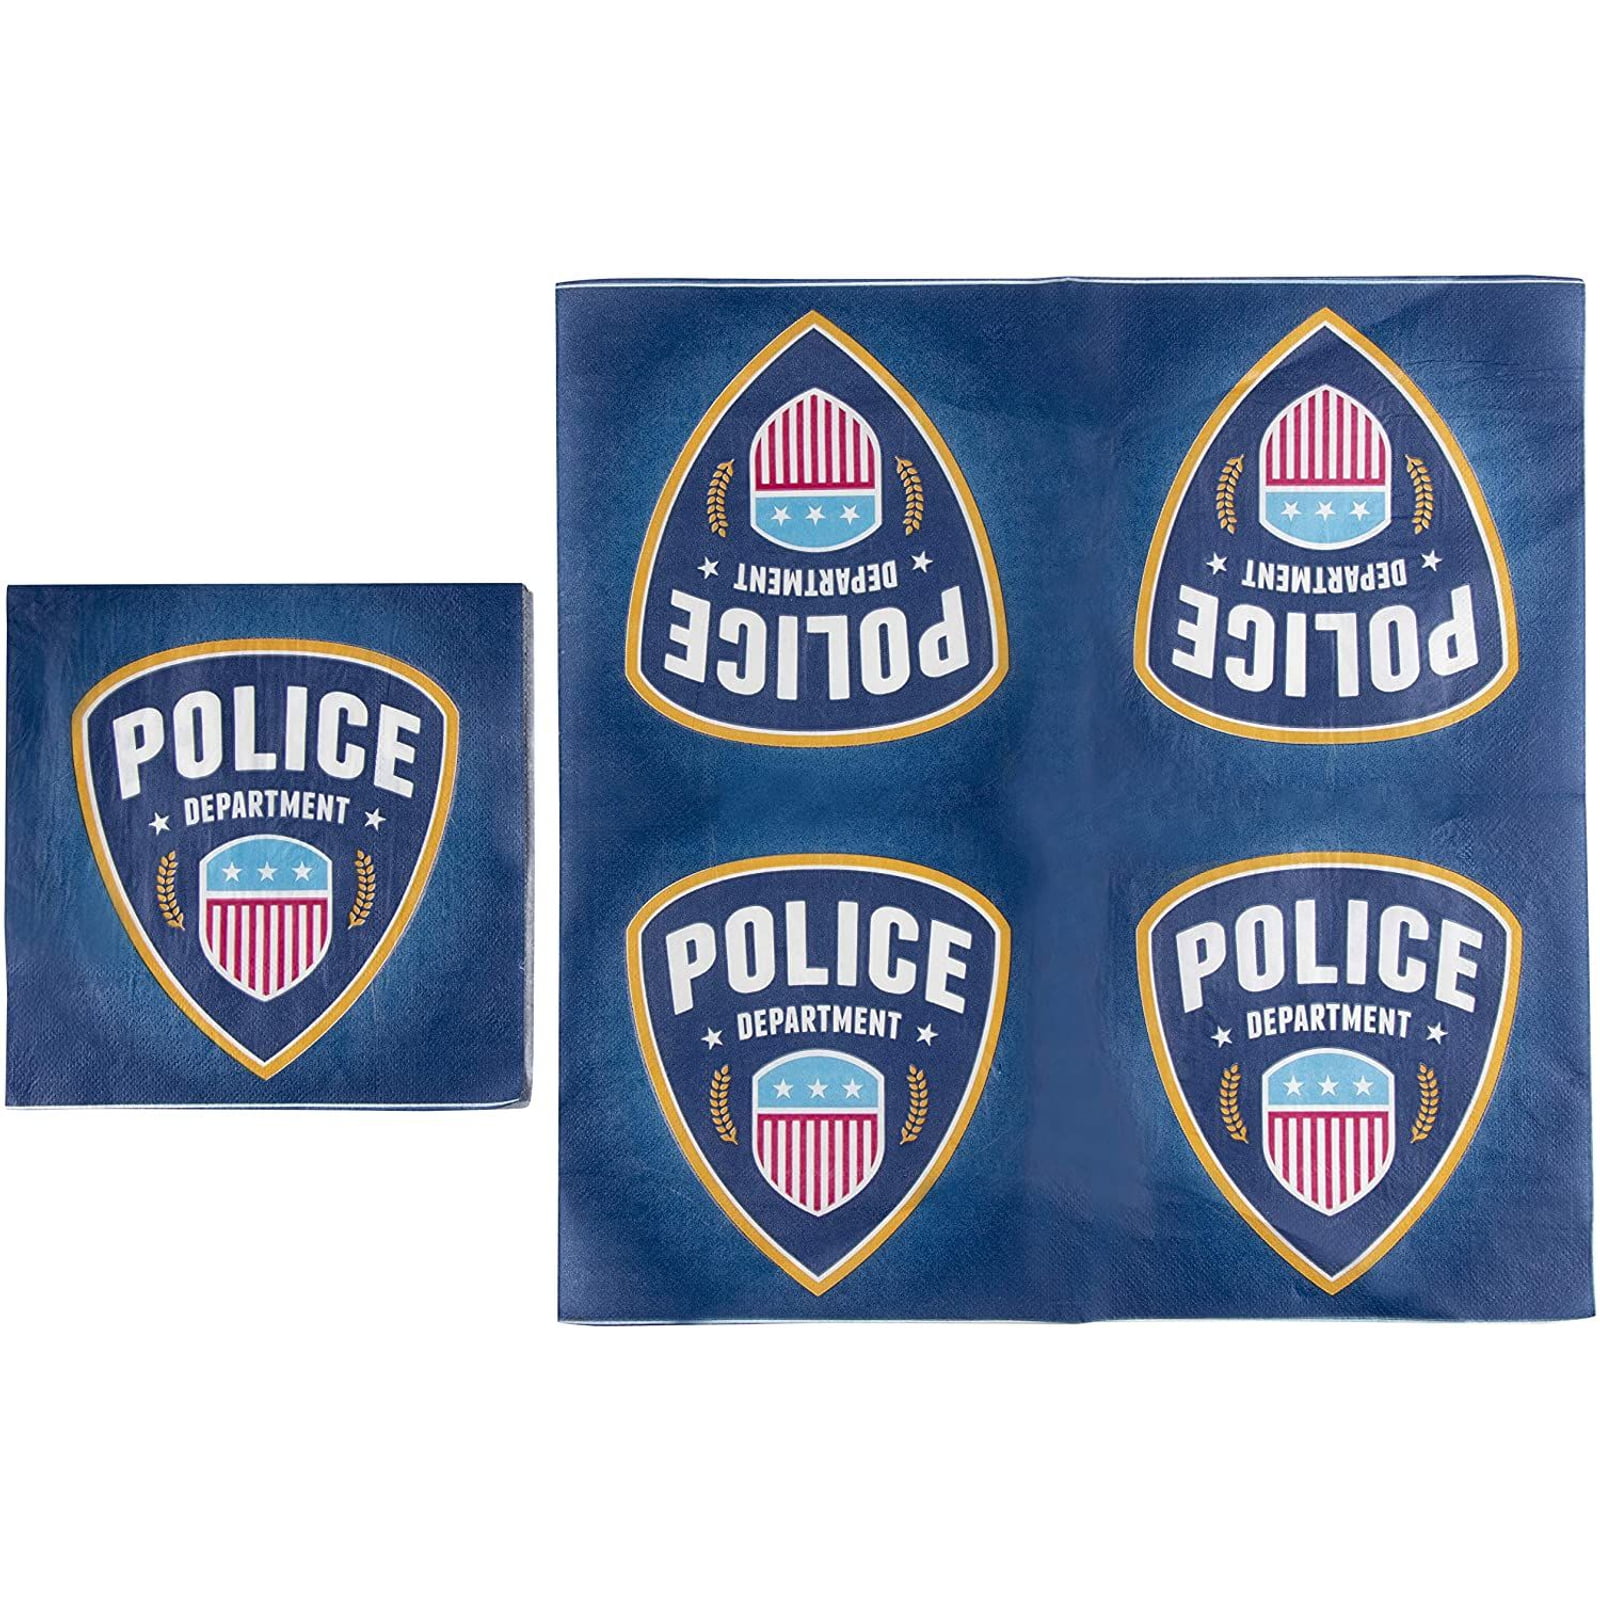 Police City Lunch Napkins Birthday Party Supplies law enforcement 